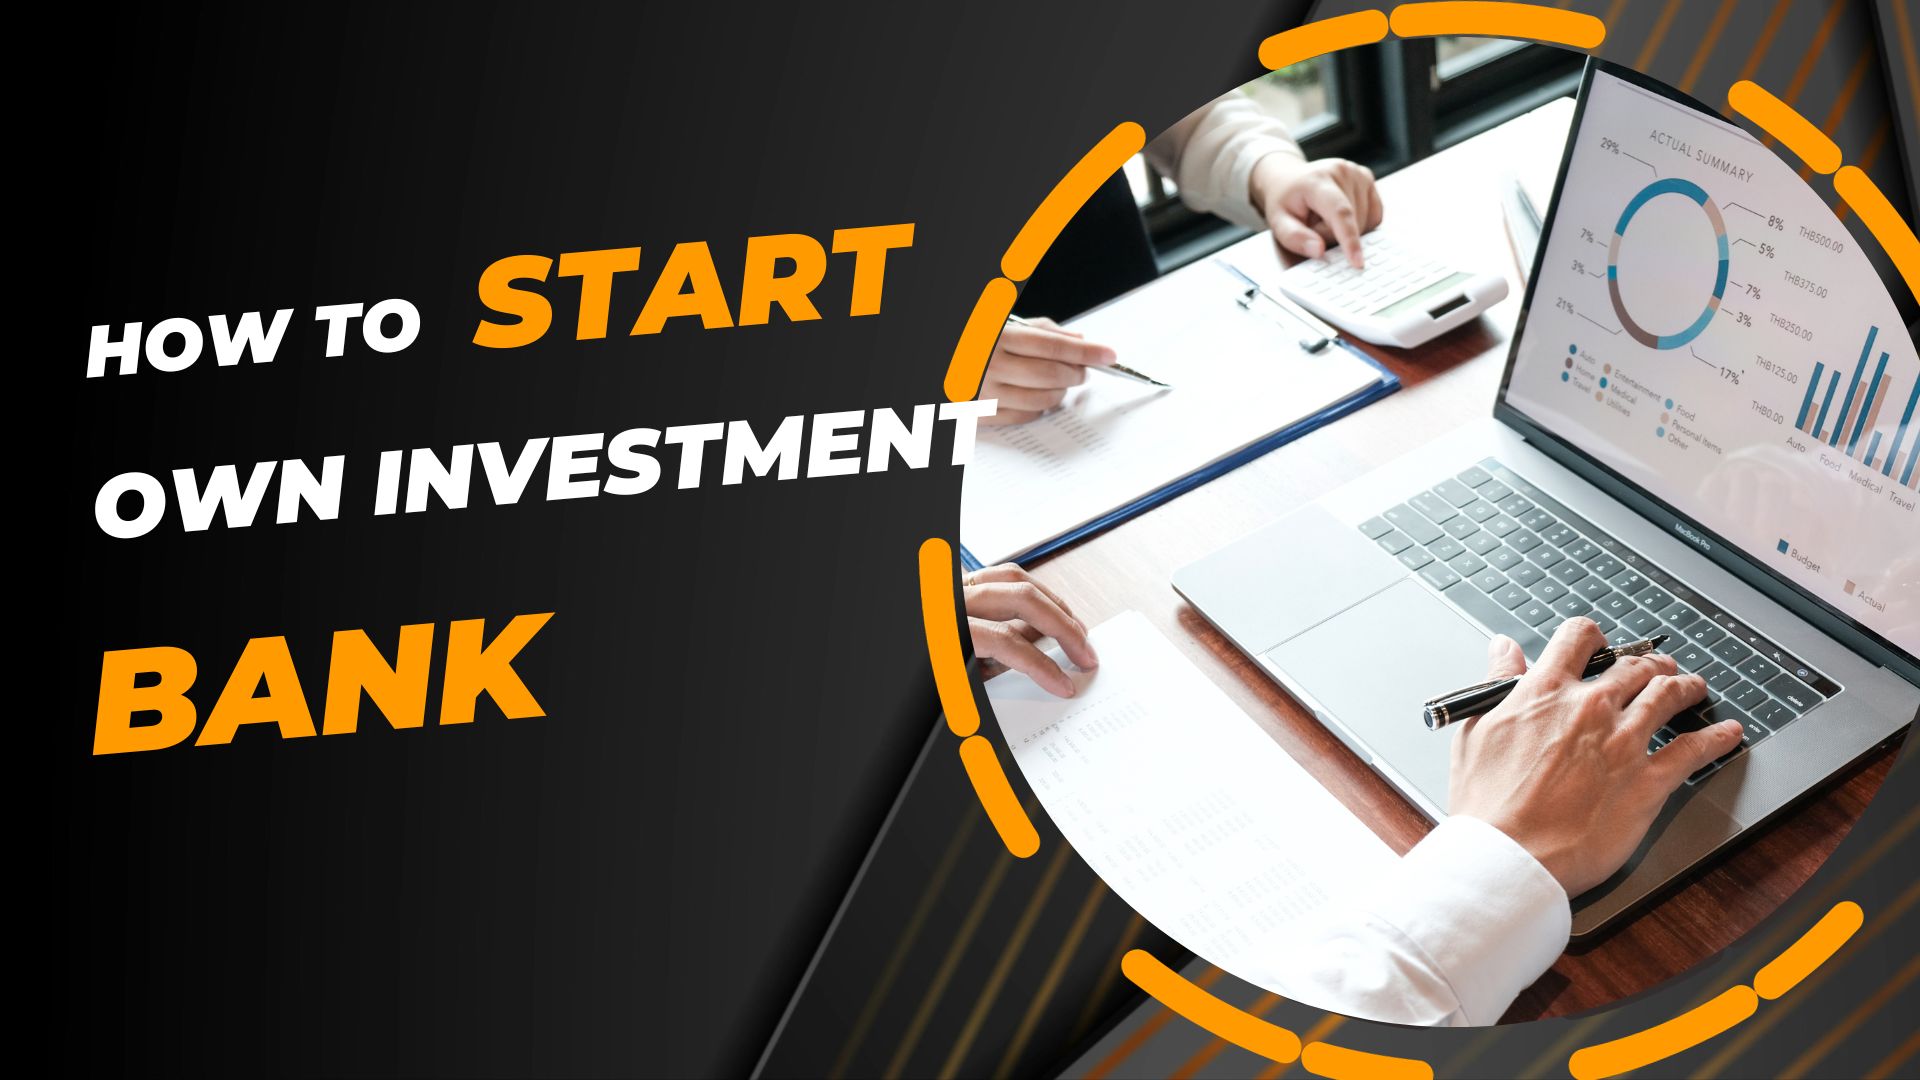 Start Your Own Investment Bank